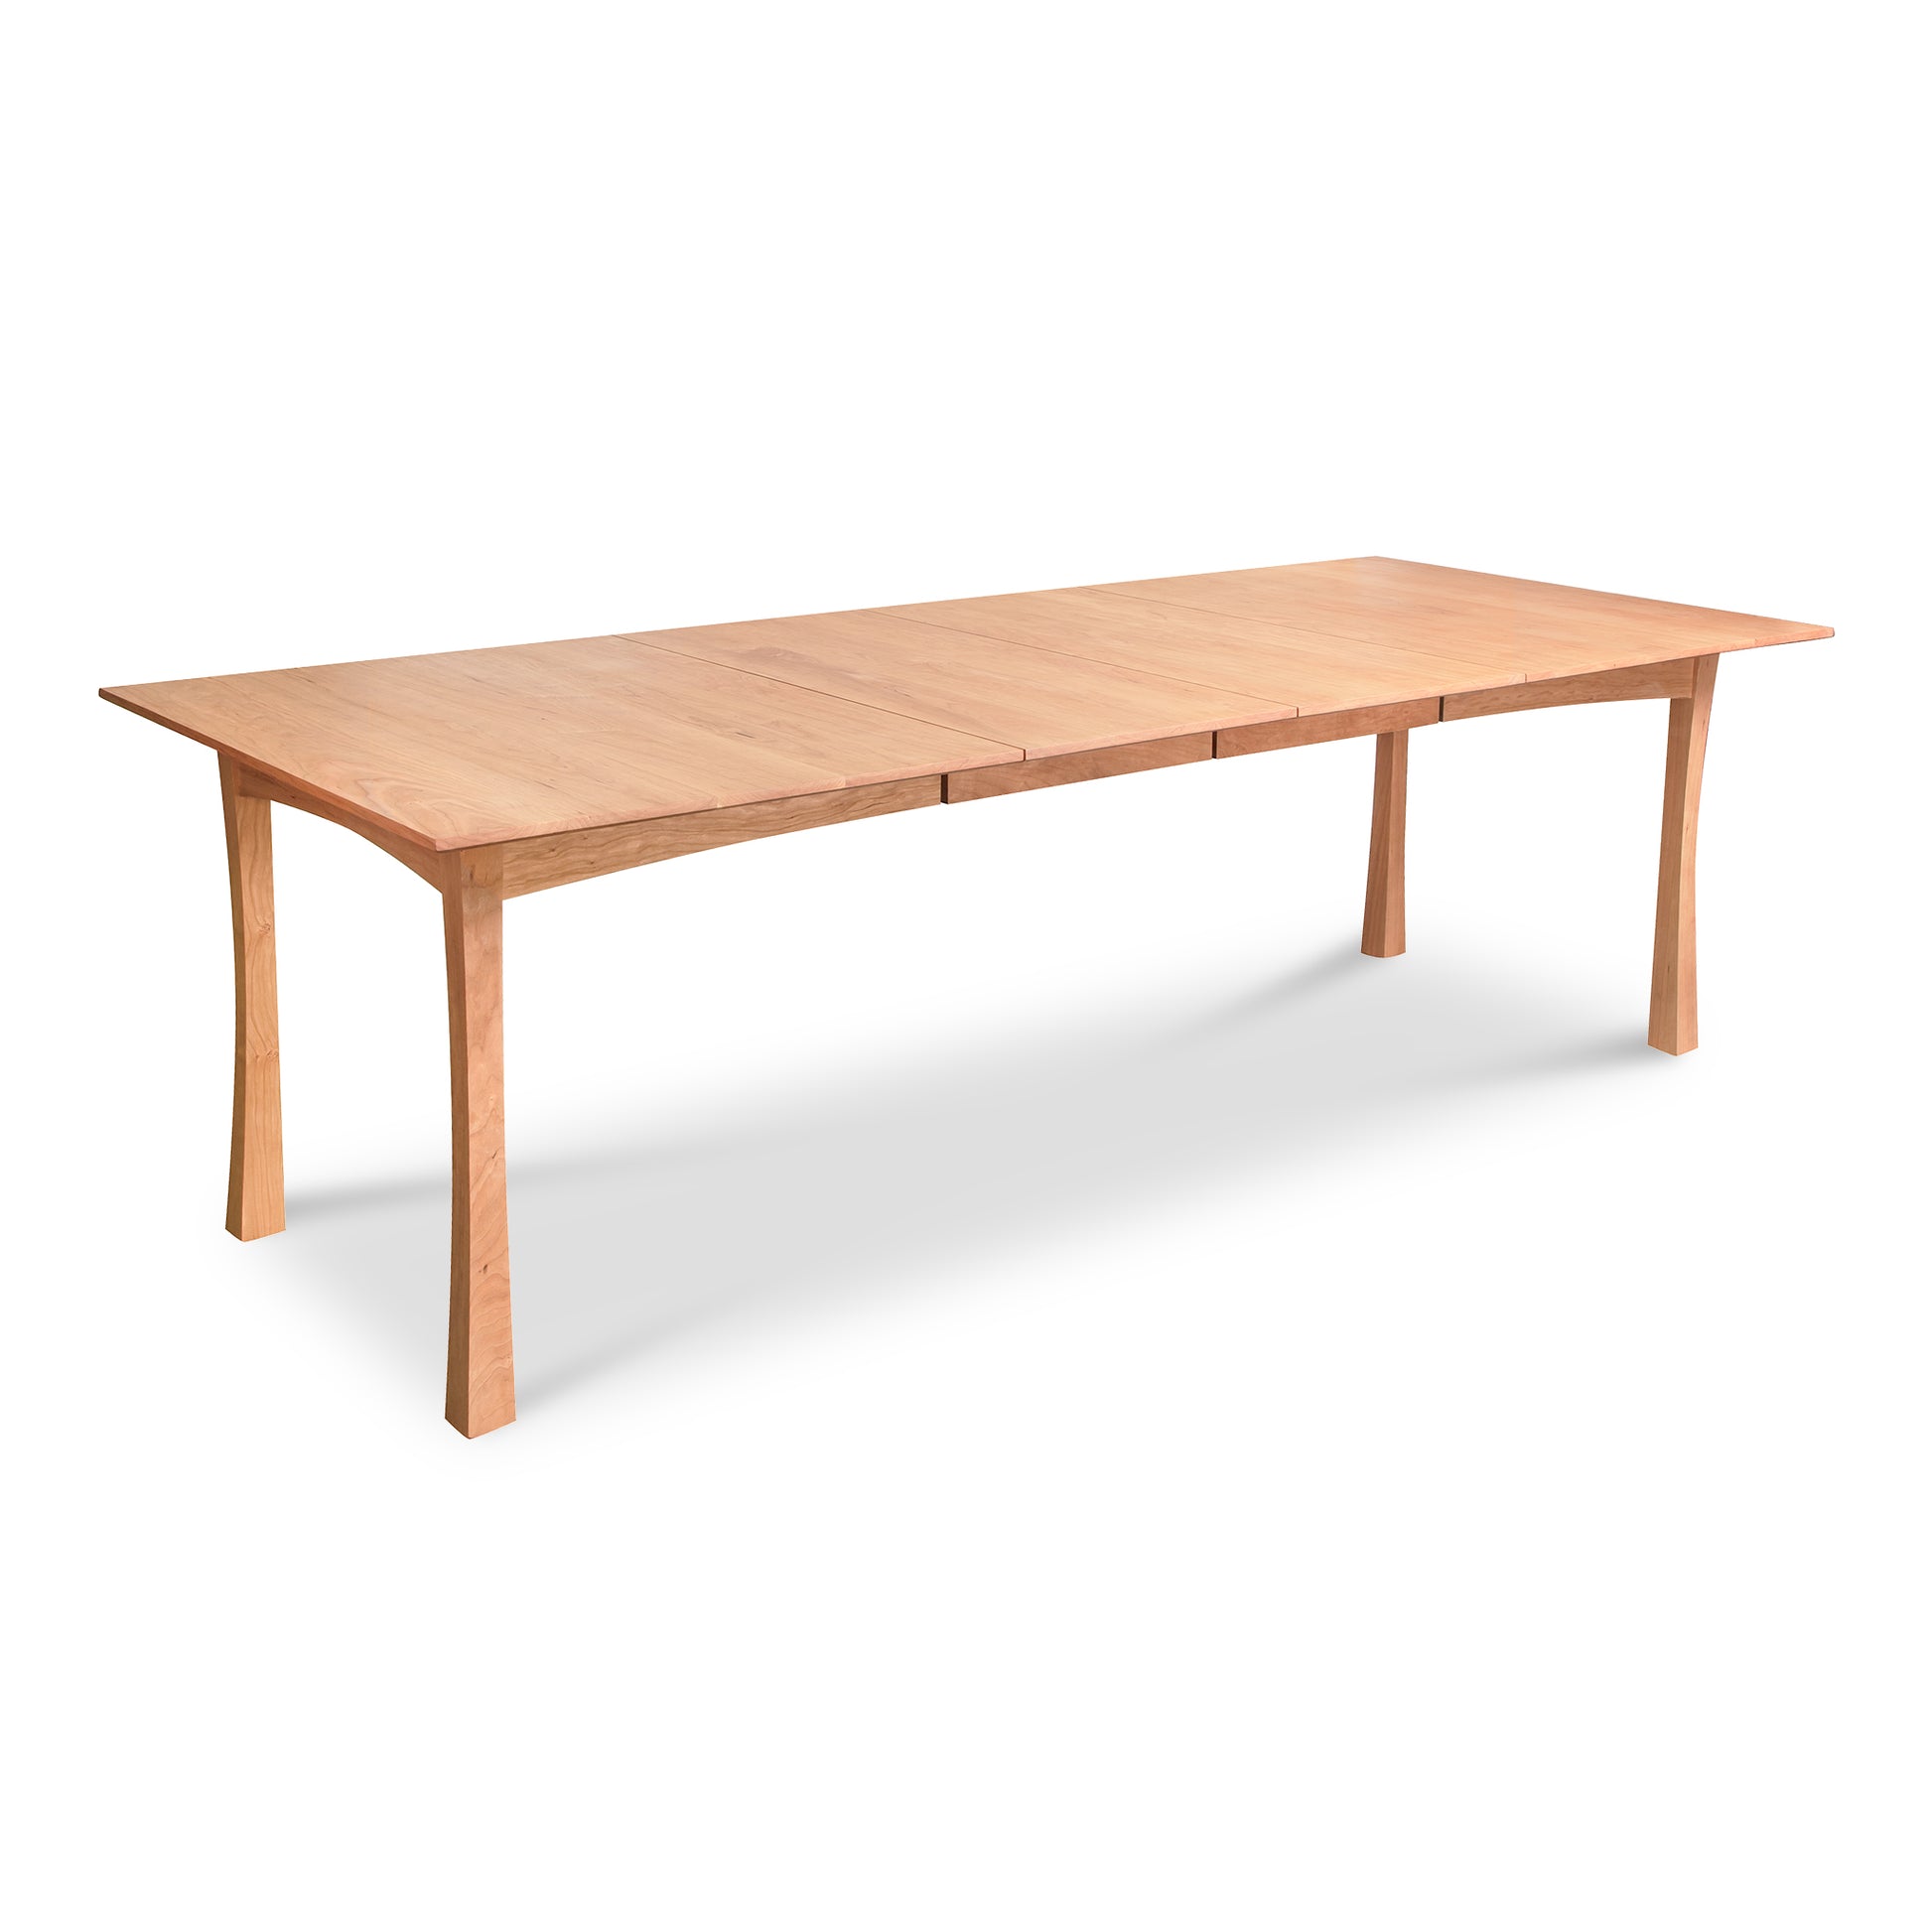 A Contemporary Craftsman Extension Dining Table with a simple design on a white background, crafted by Vermont Furniture Designs woodworkers.